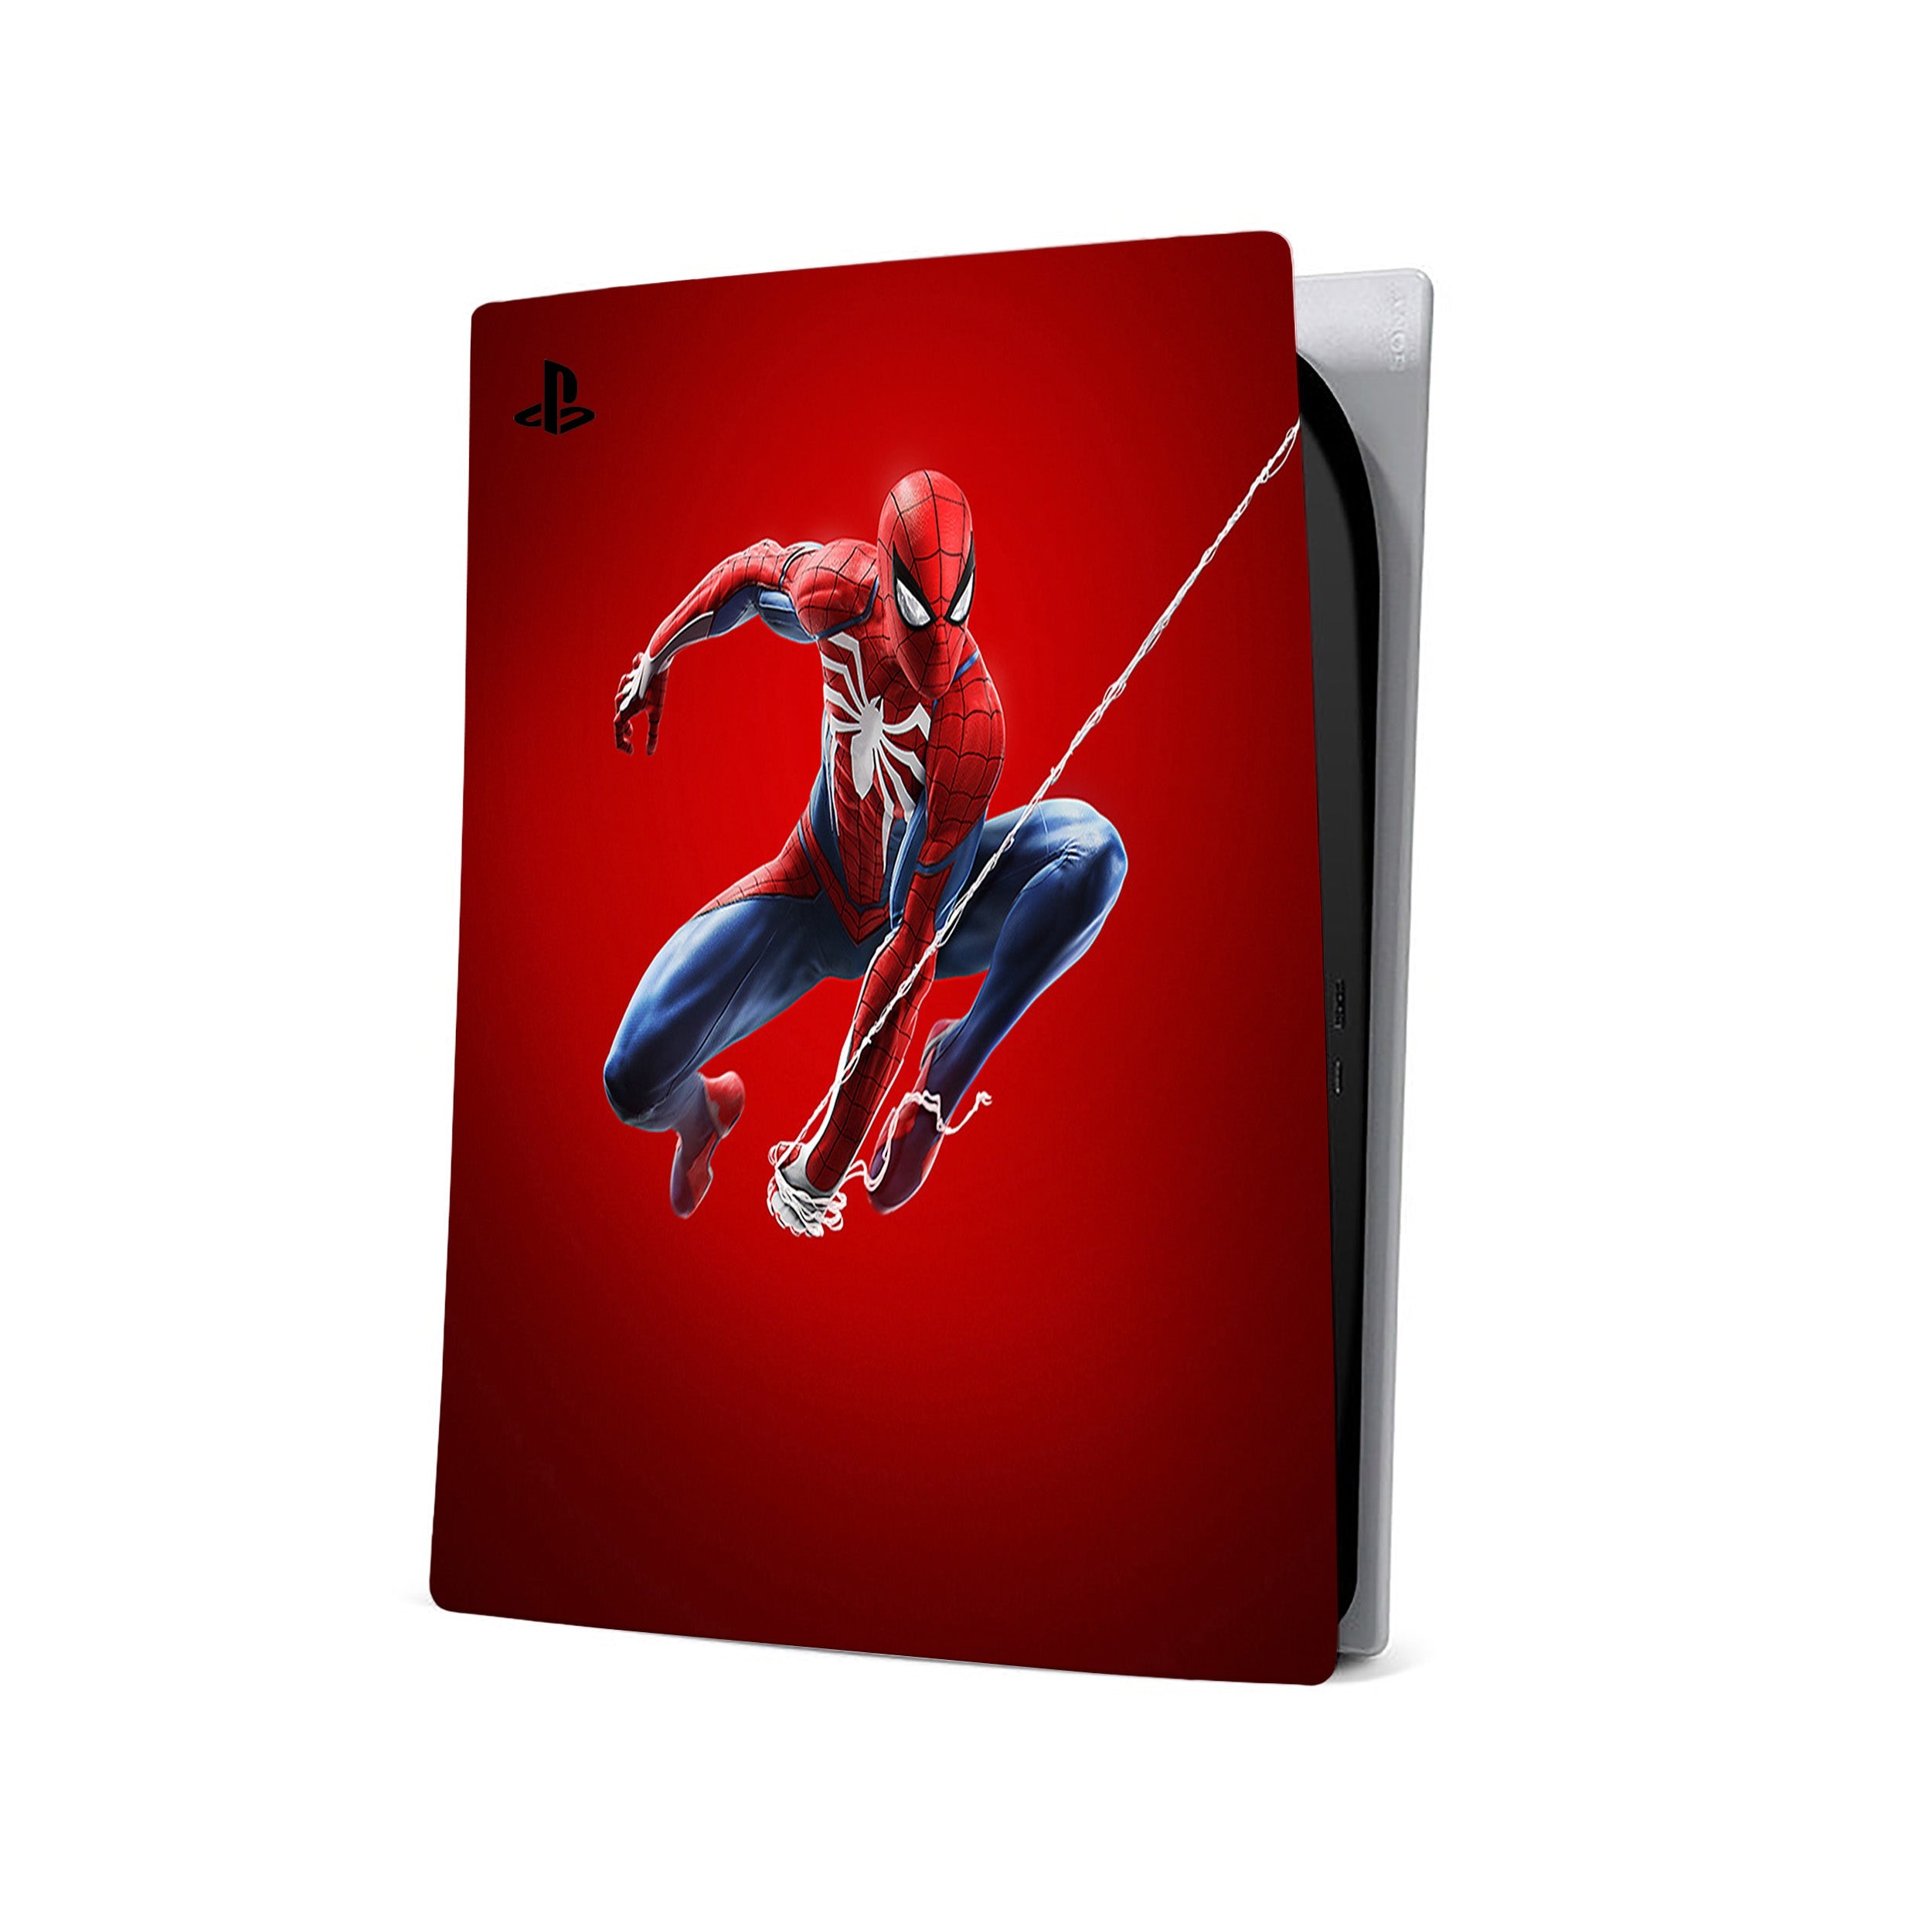 A video game skin featuring a Marvel Spiderman design for the PS5.